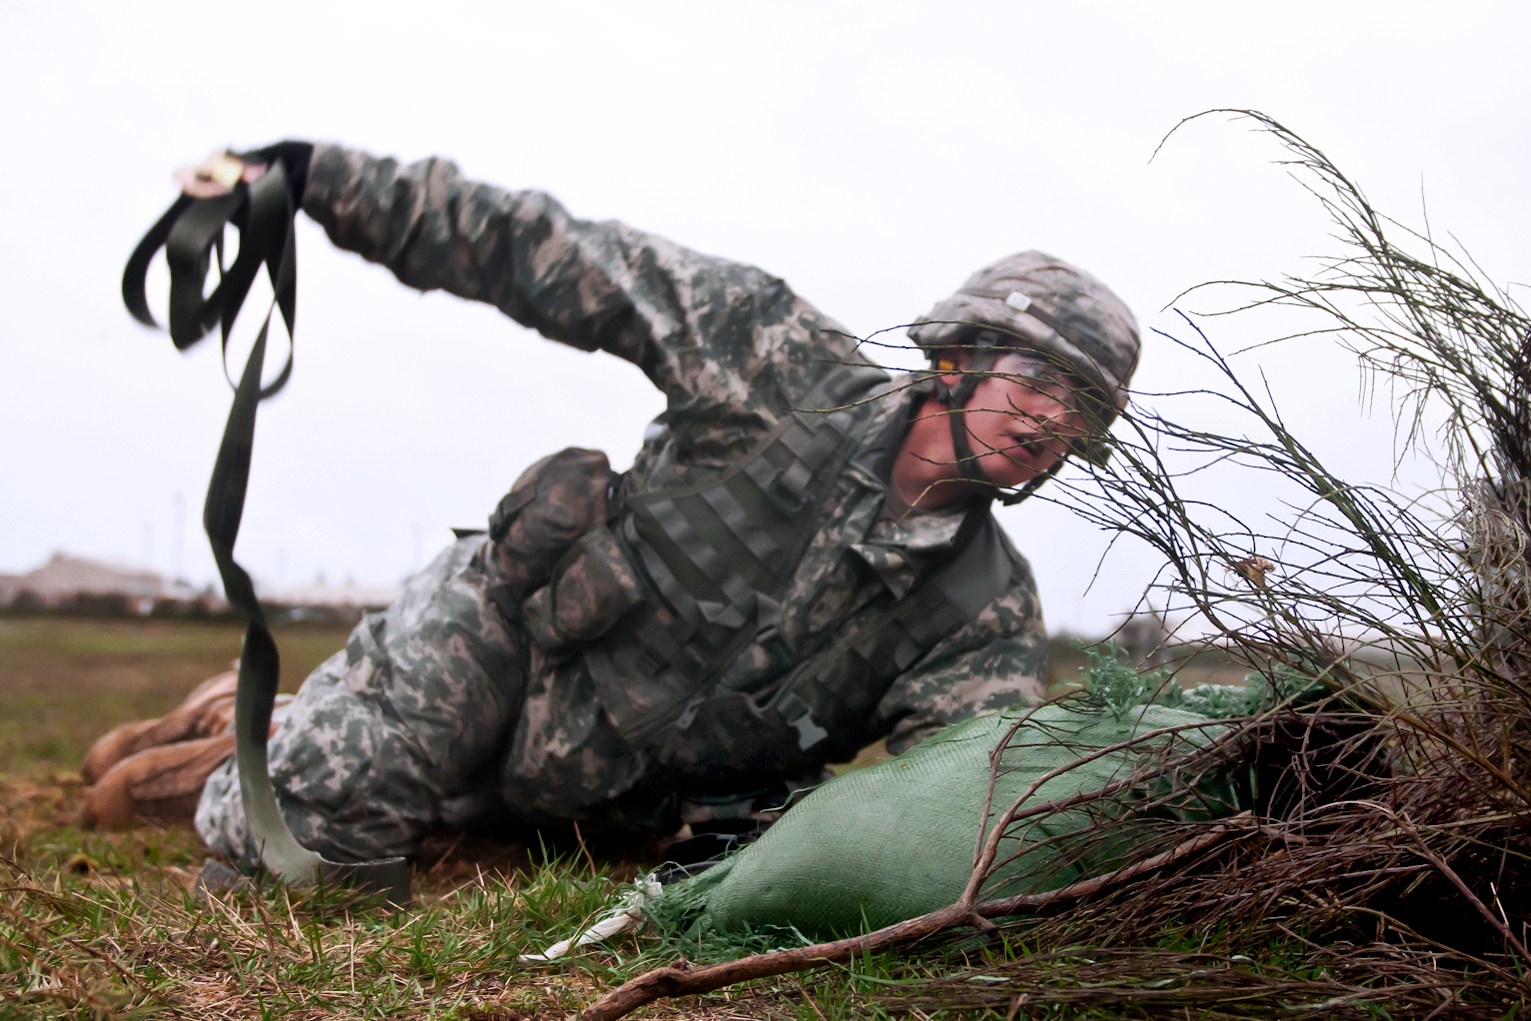 Army Pfc. Steven Williams throws a grappling hook to check for